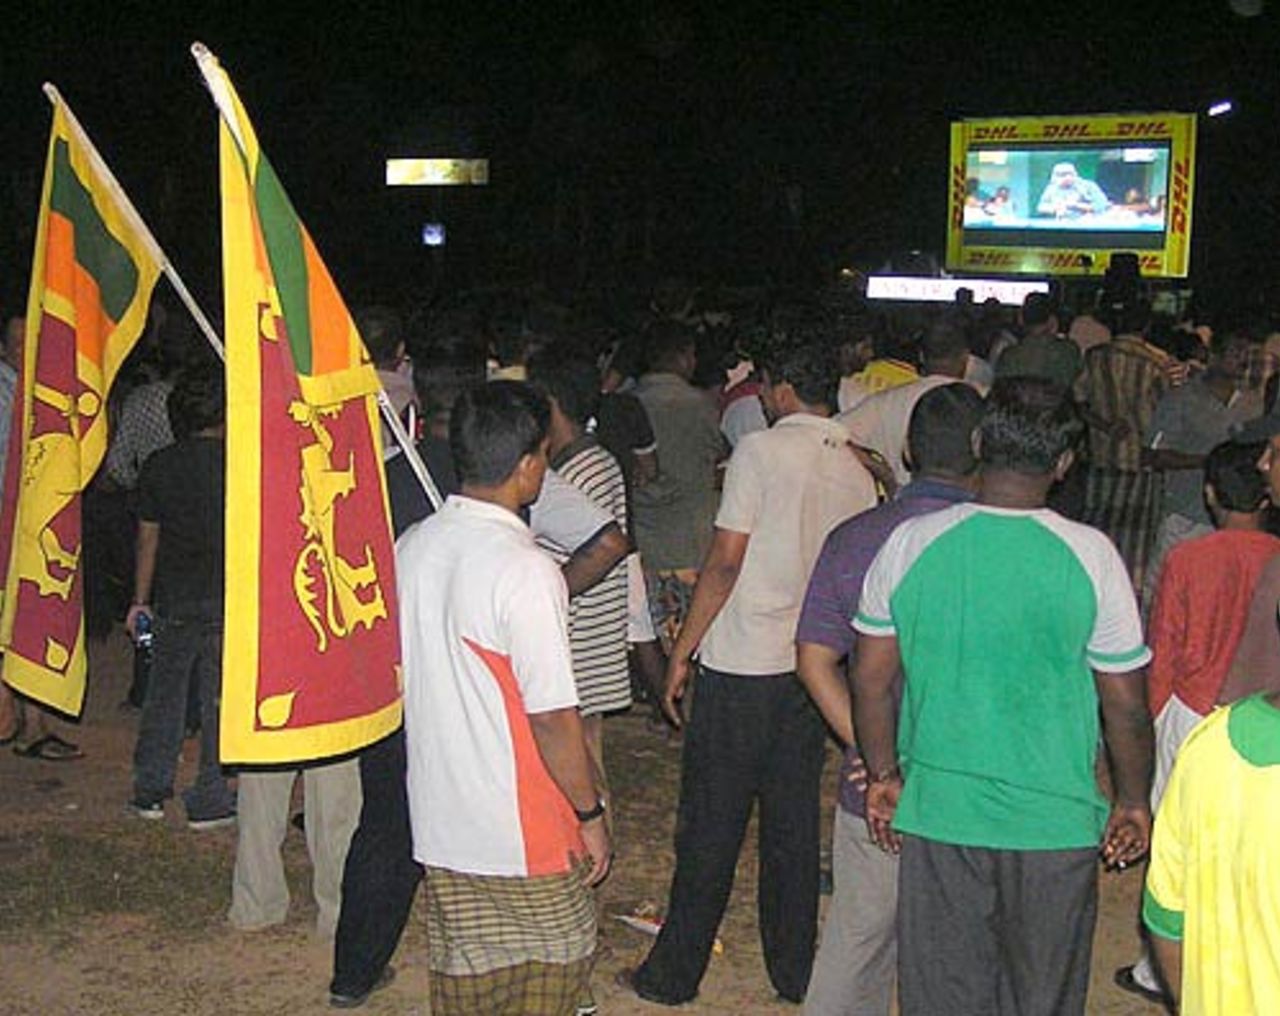 Sri Lankan fans in Colombo catch the semi-final action through the big screen, Colombo, April 24, 2007